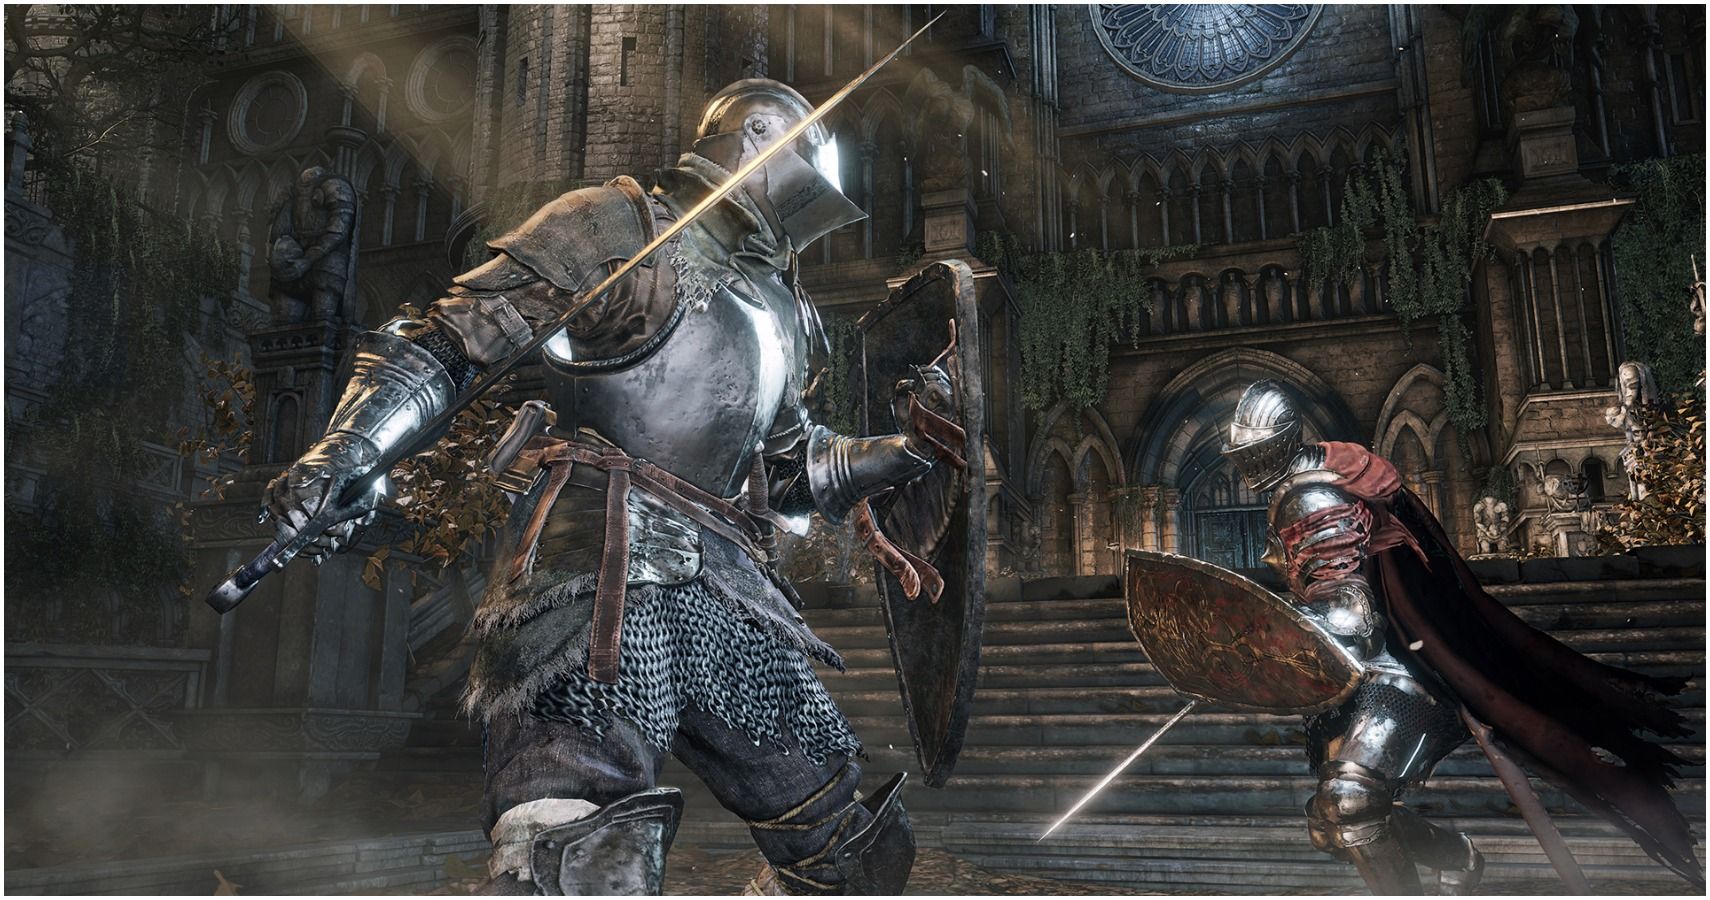 The player facing a Knight.